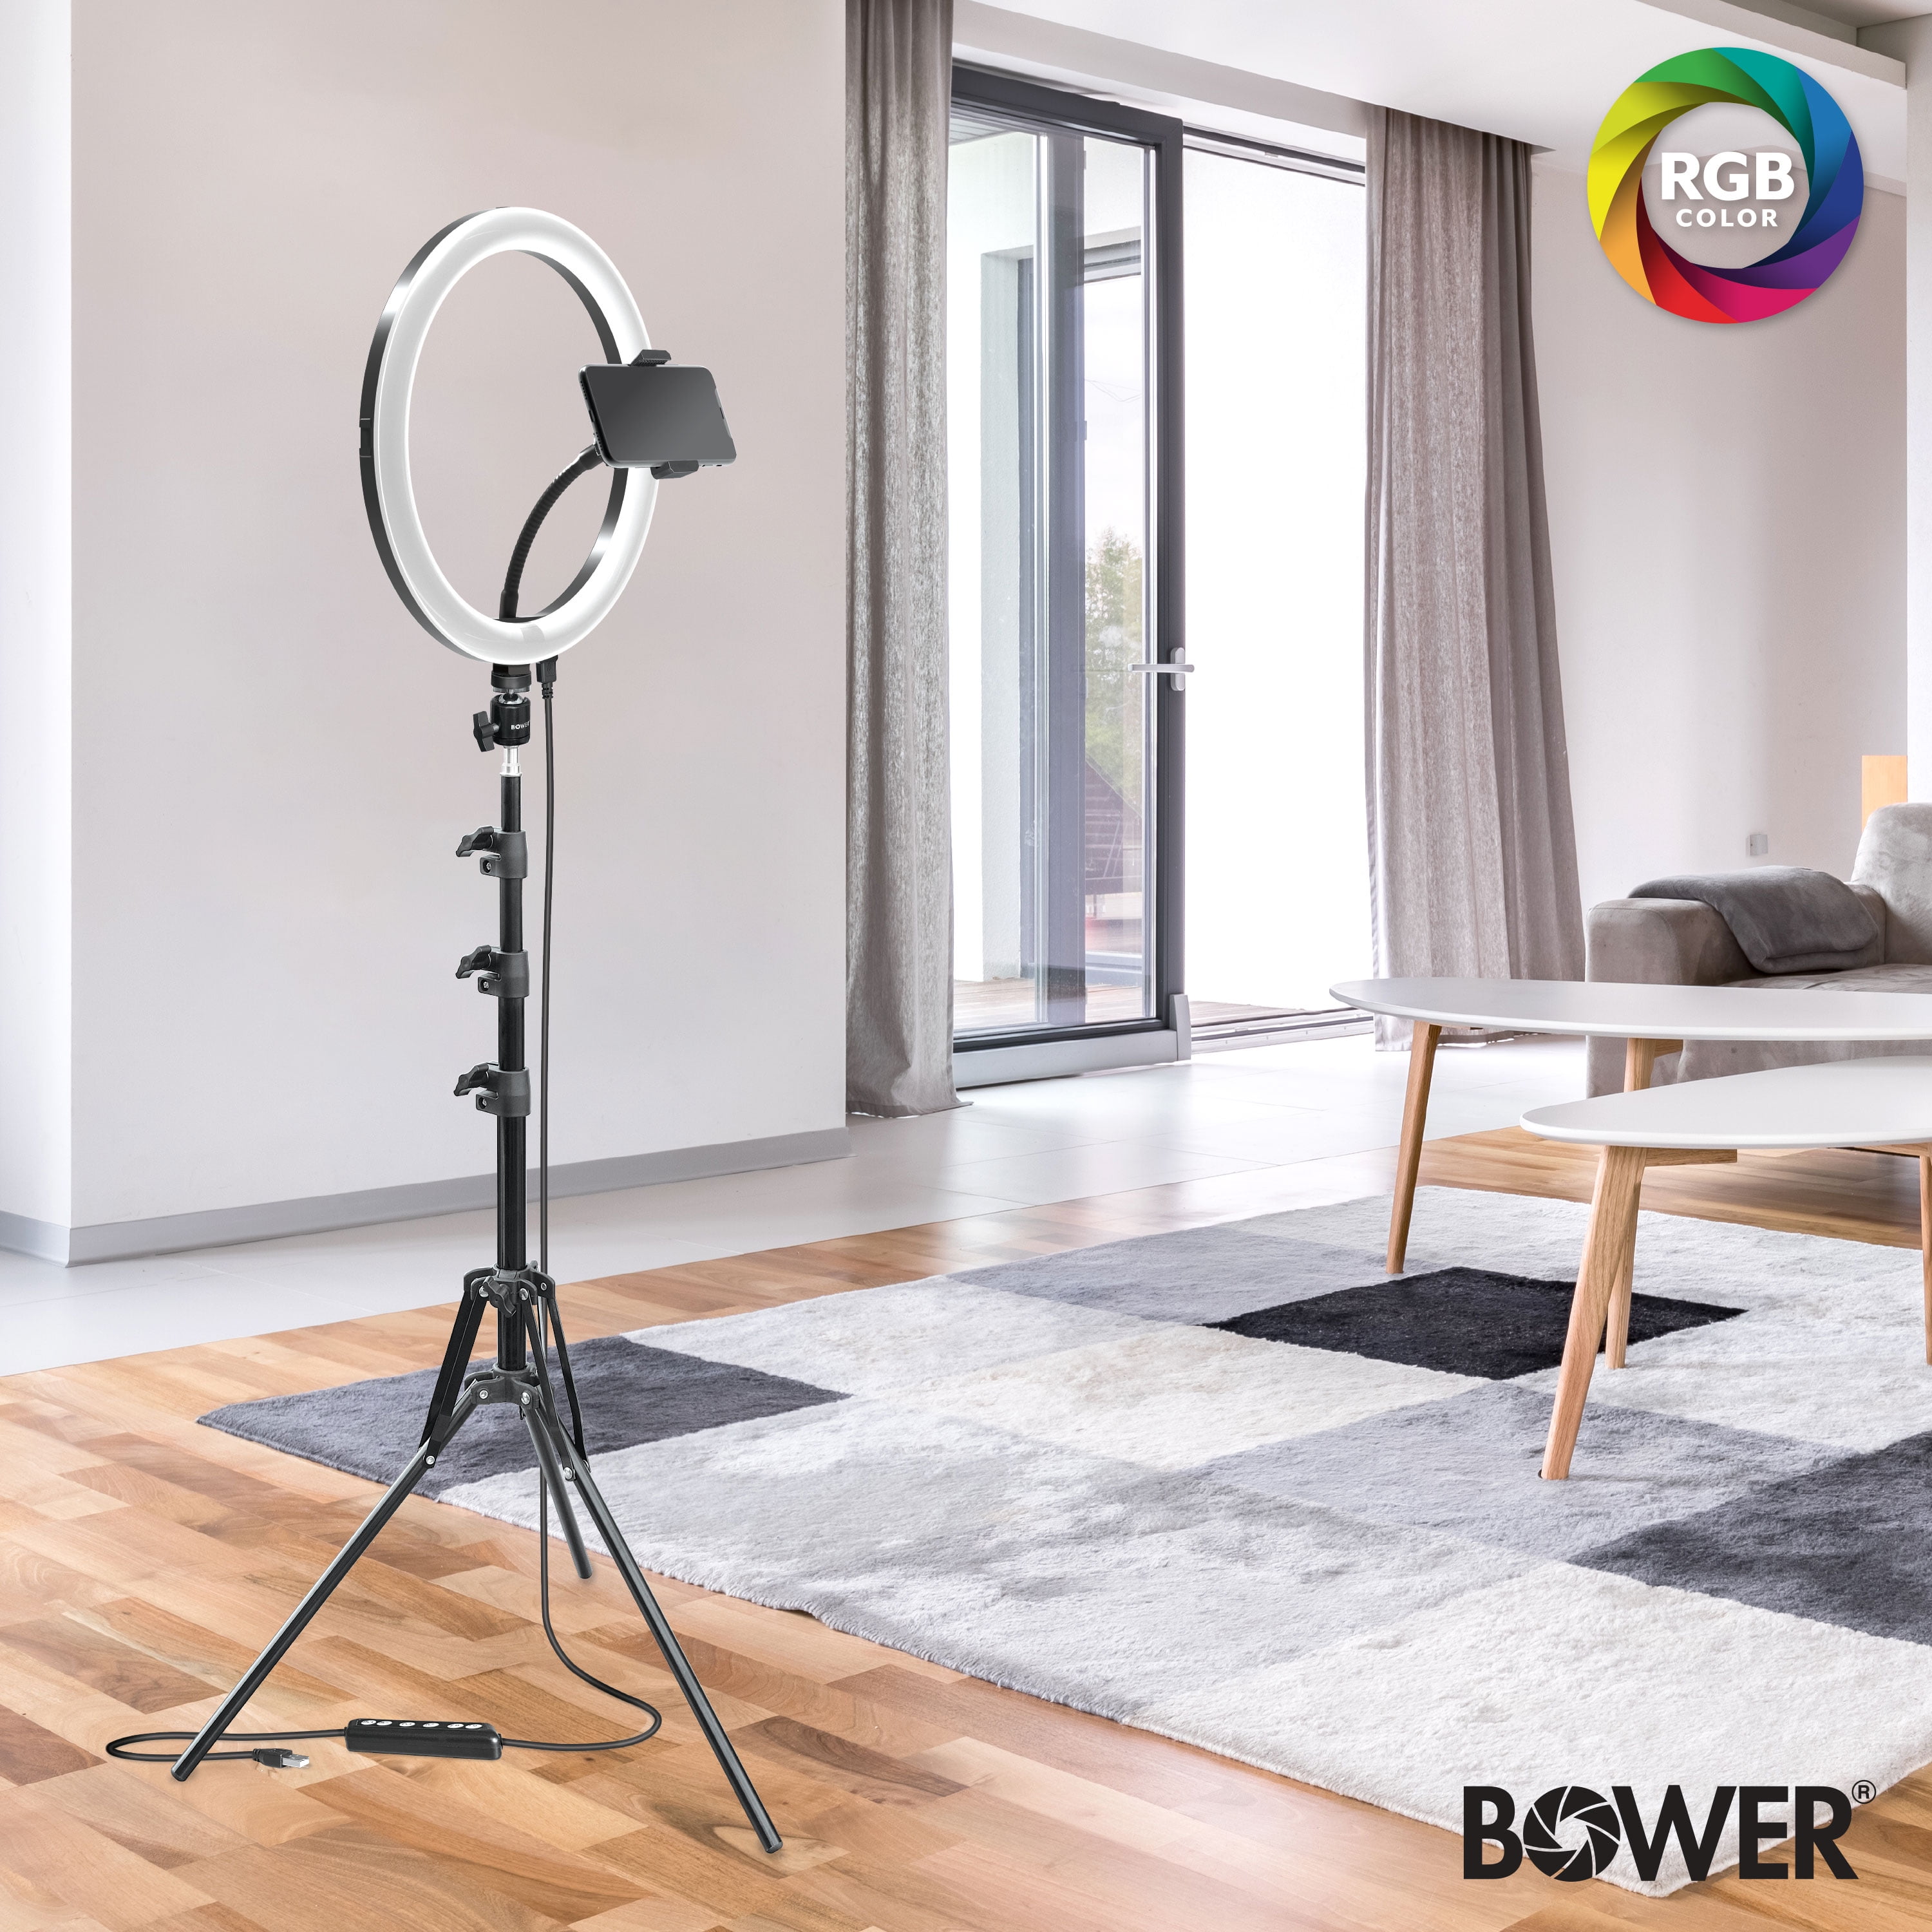 Bower 12-inch LED RGB Ring Light Studio Kit with Special Effects